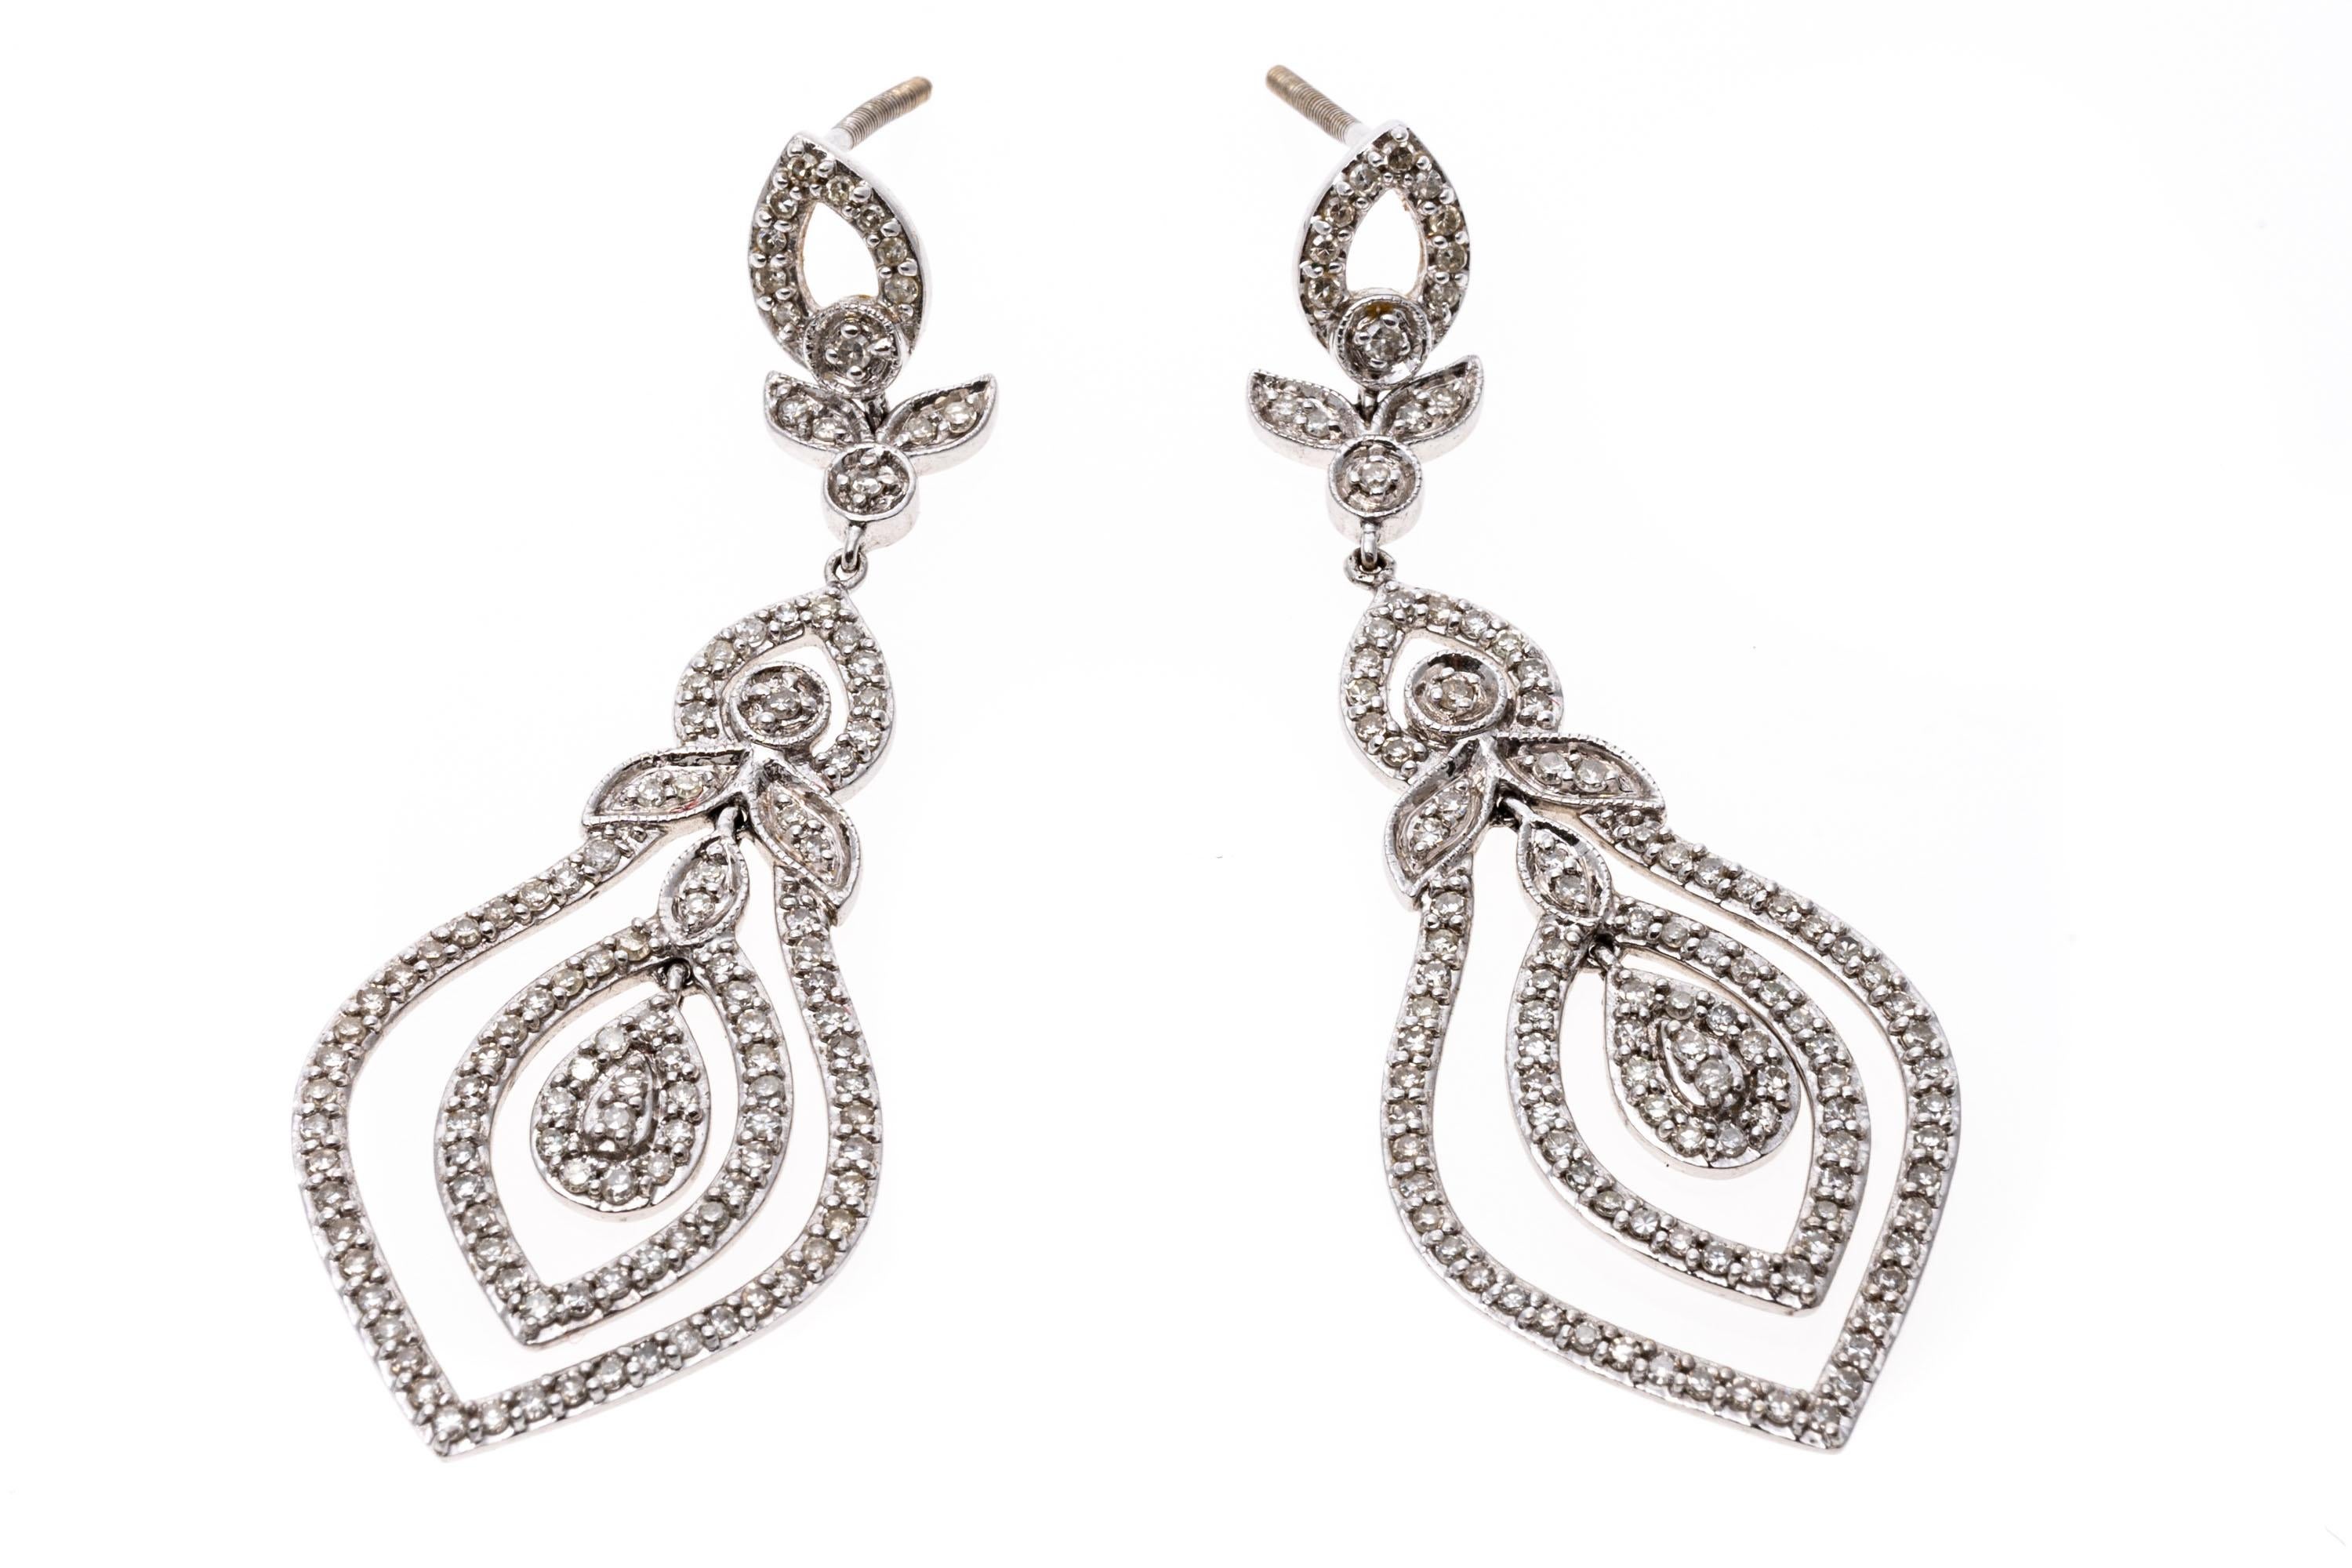 Elegant and elaborate, this pair of 14K white gold pendant style earrings is set with dazzling diamonds. Suspended from the base of the earrings is a nested series of rings that move and shimmer as the wearer moves. Diamonds are approximately 1.5